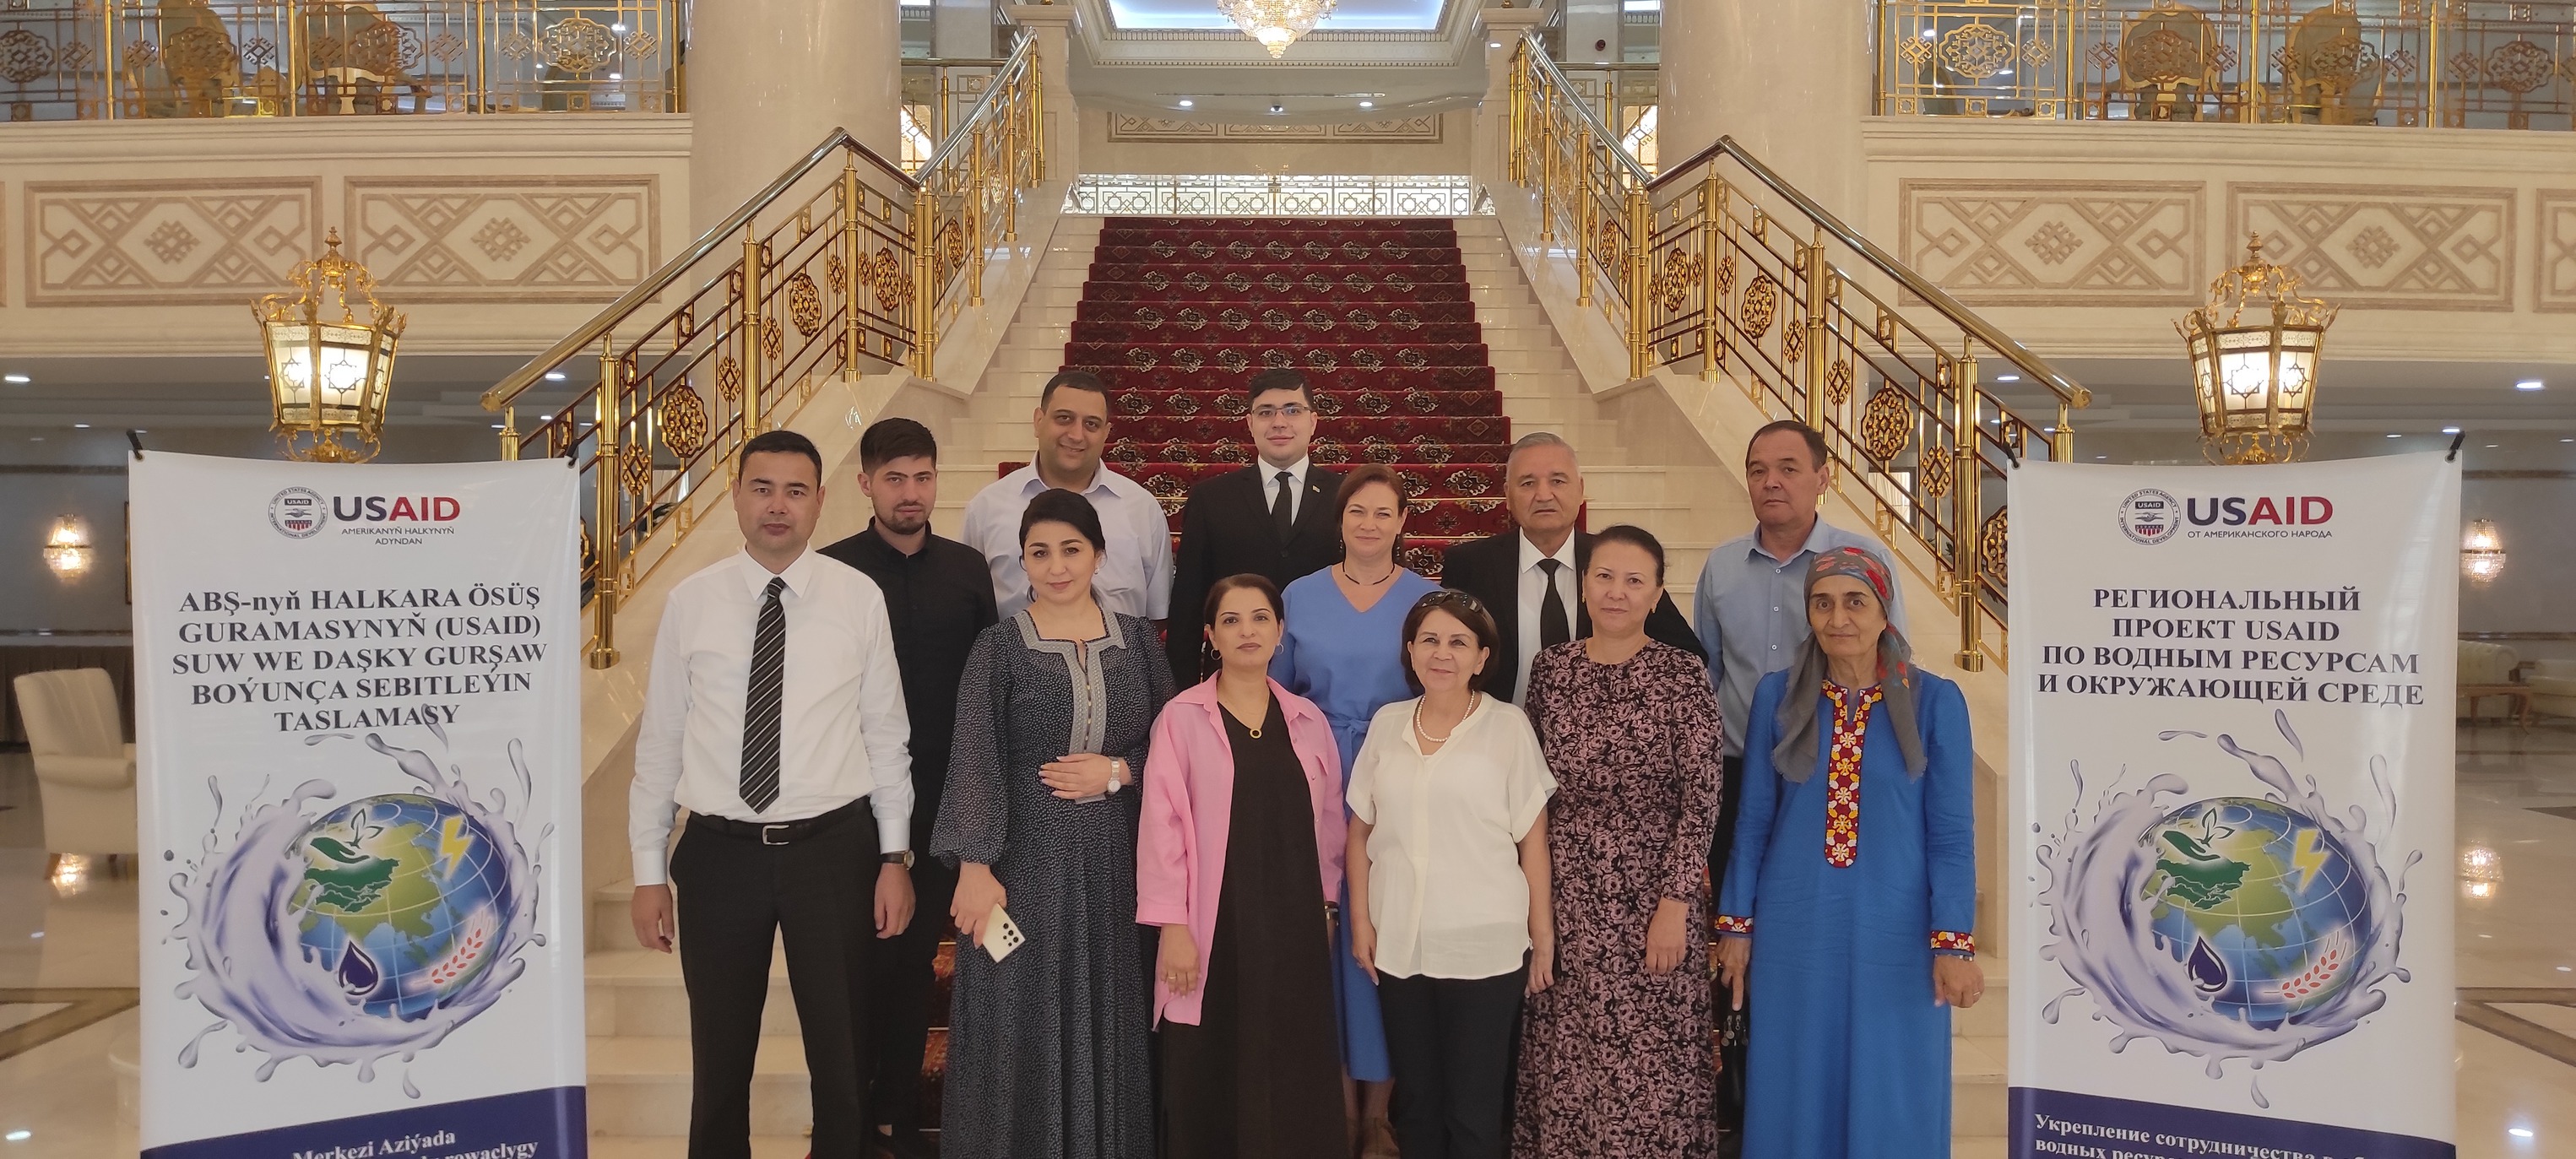 USAID organized a national workshop to familiarize government officials in Turkmenistan